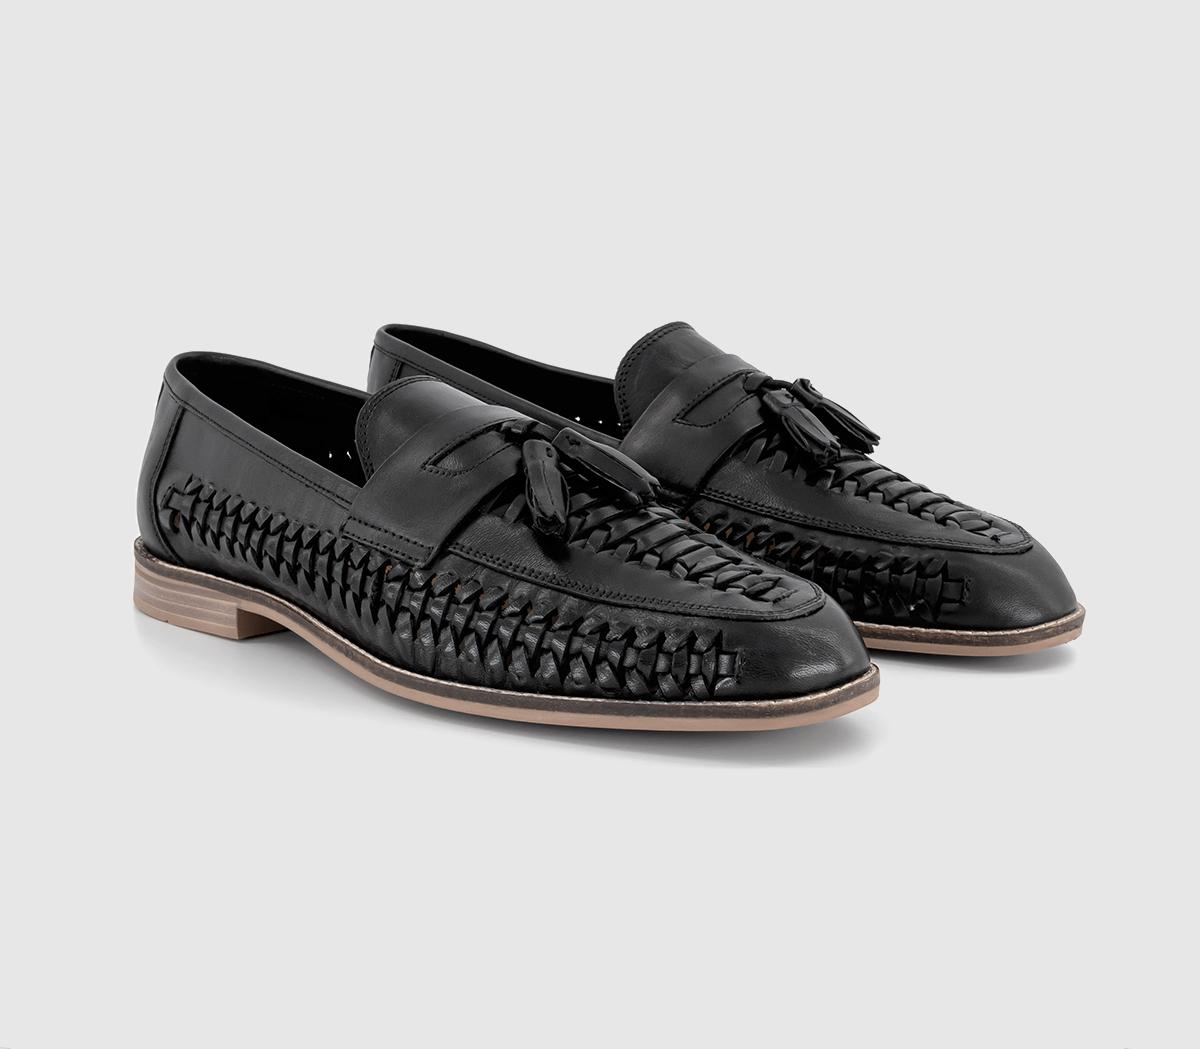 OFFICE Mens Clapham Tassel Woven Loafers Black Leather, 11